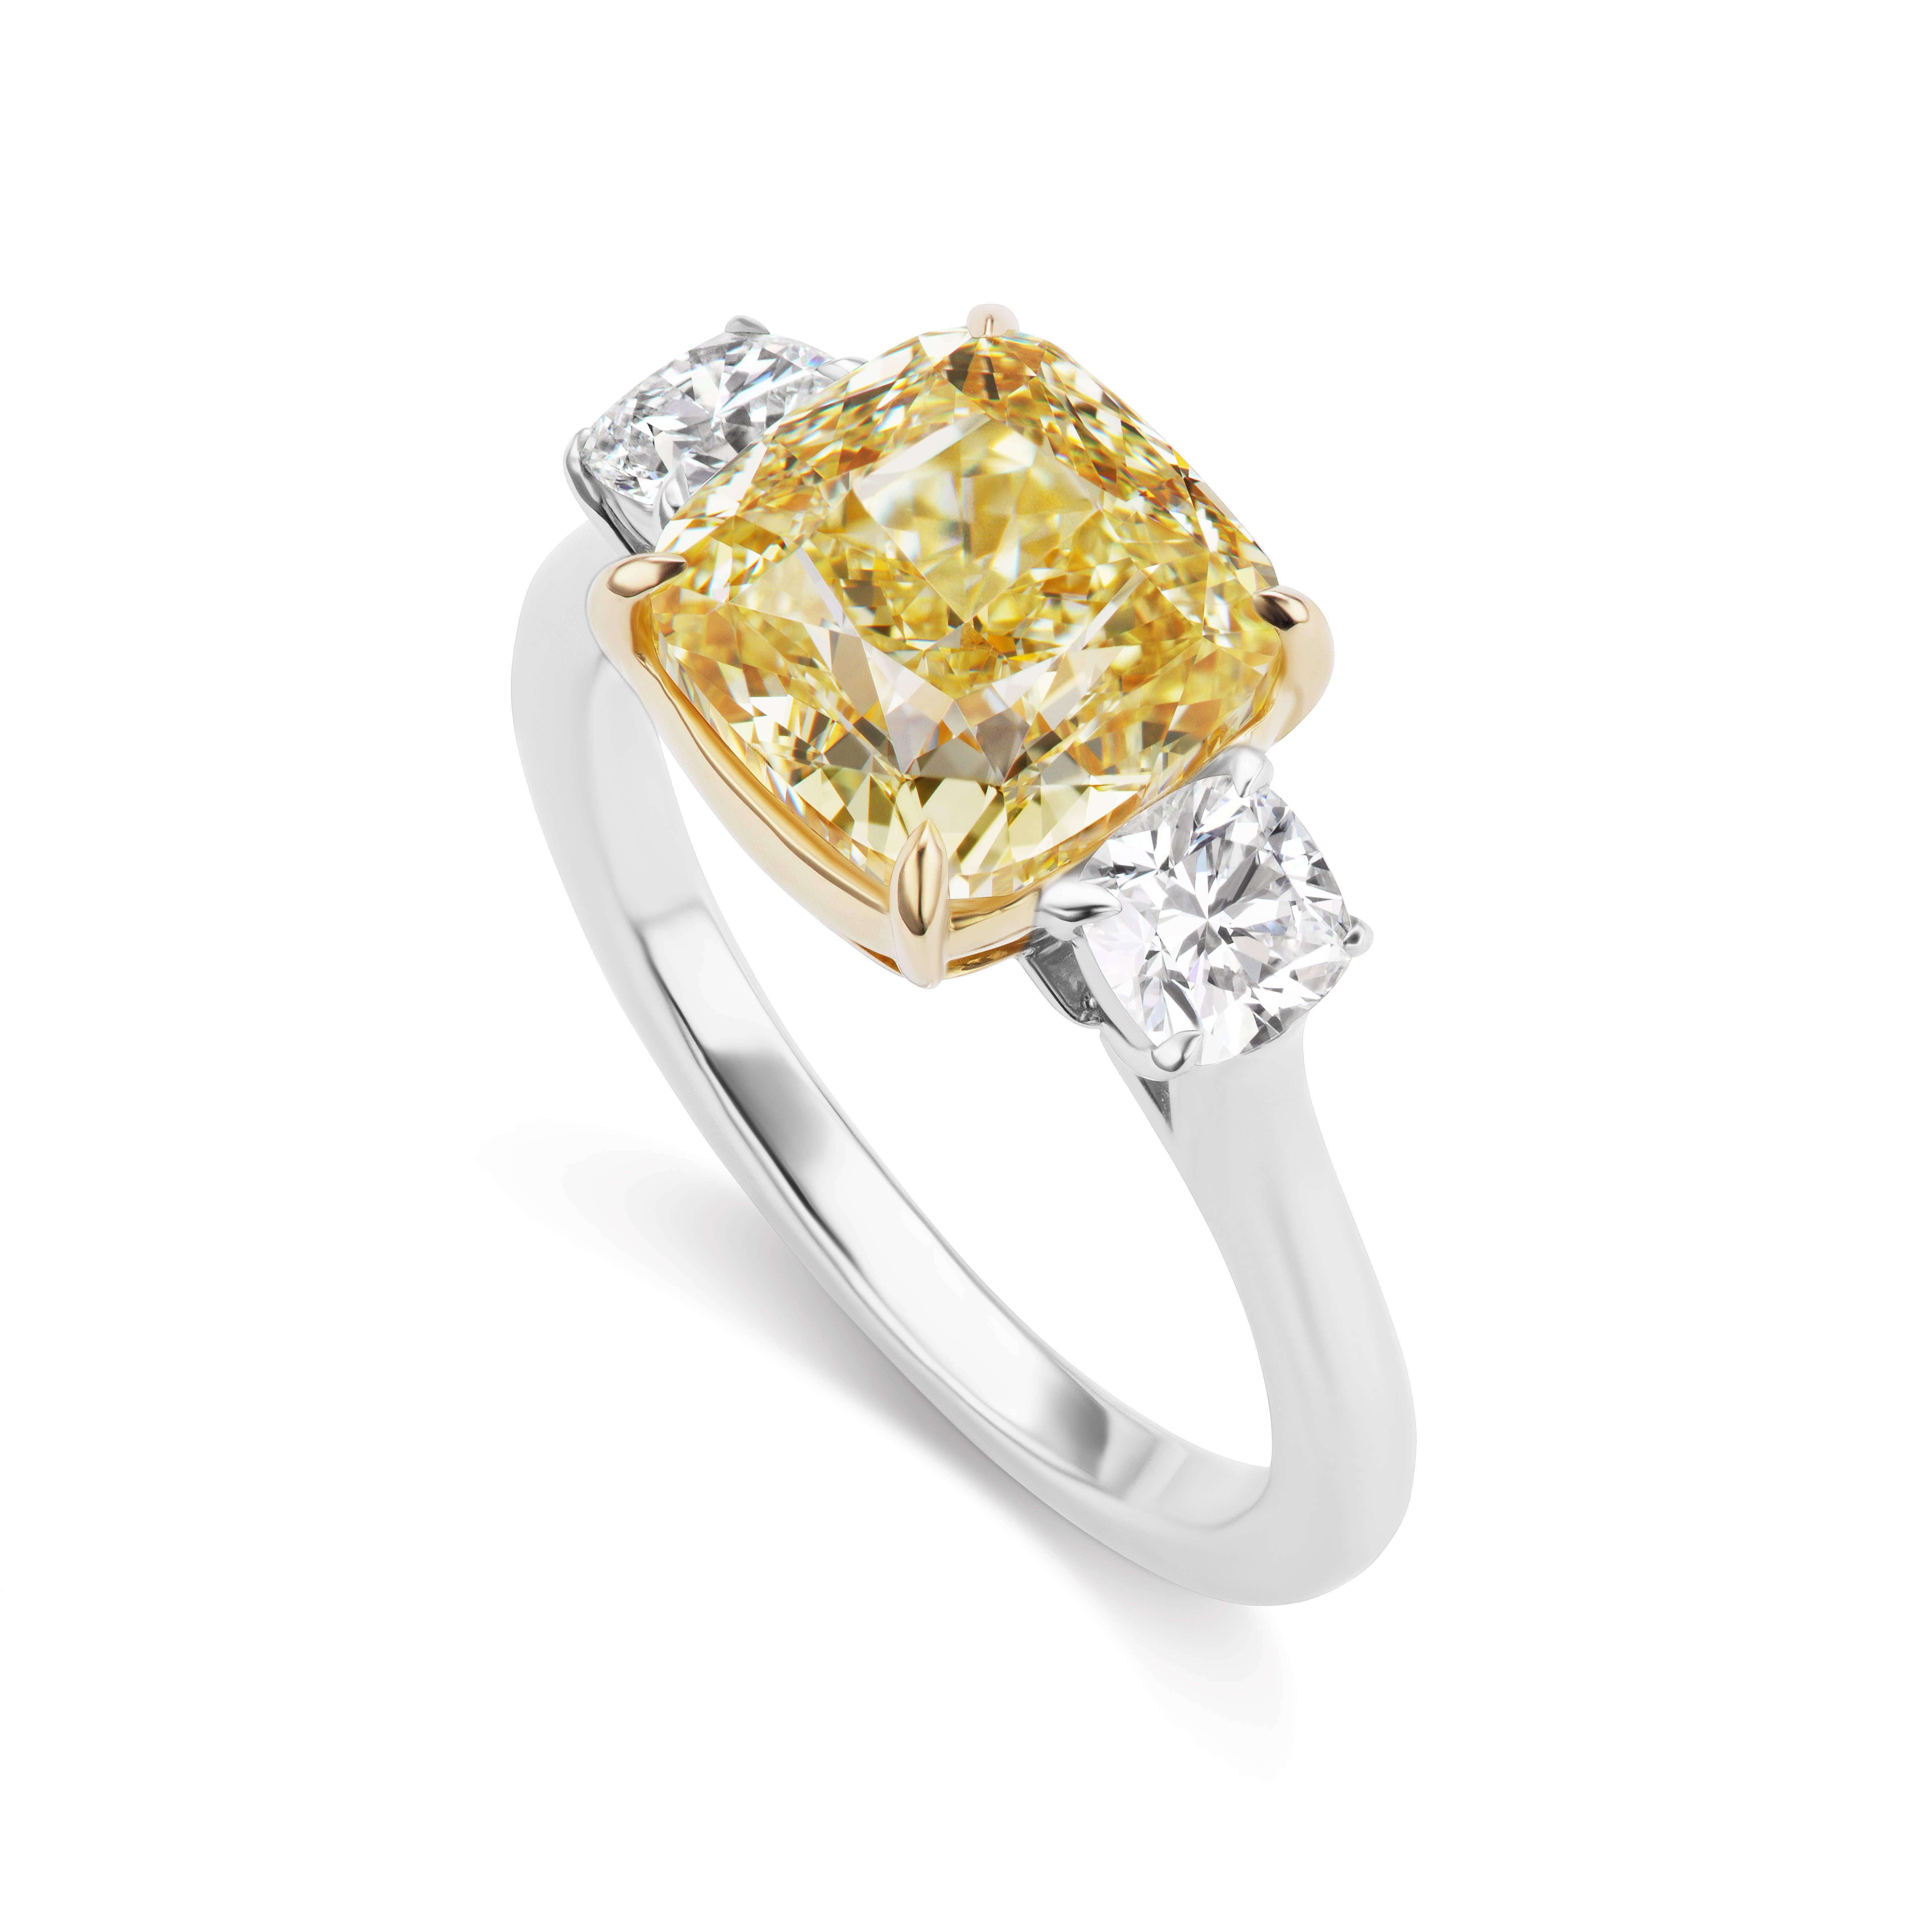 2018 is the Year of the Three Stone Cushion Cut Engagement Ring  and this ring is perfection with a 3.74 carat Fancy Yellow Cushion Cut Diamond of  VS2 clarity, GIA Certified,  with .58 carats in white side Cushion cut diamonds in Platinum and 18